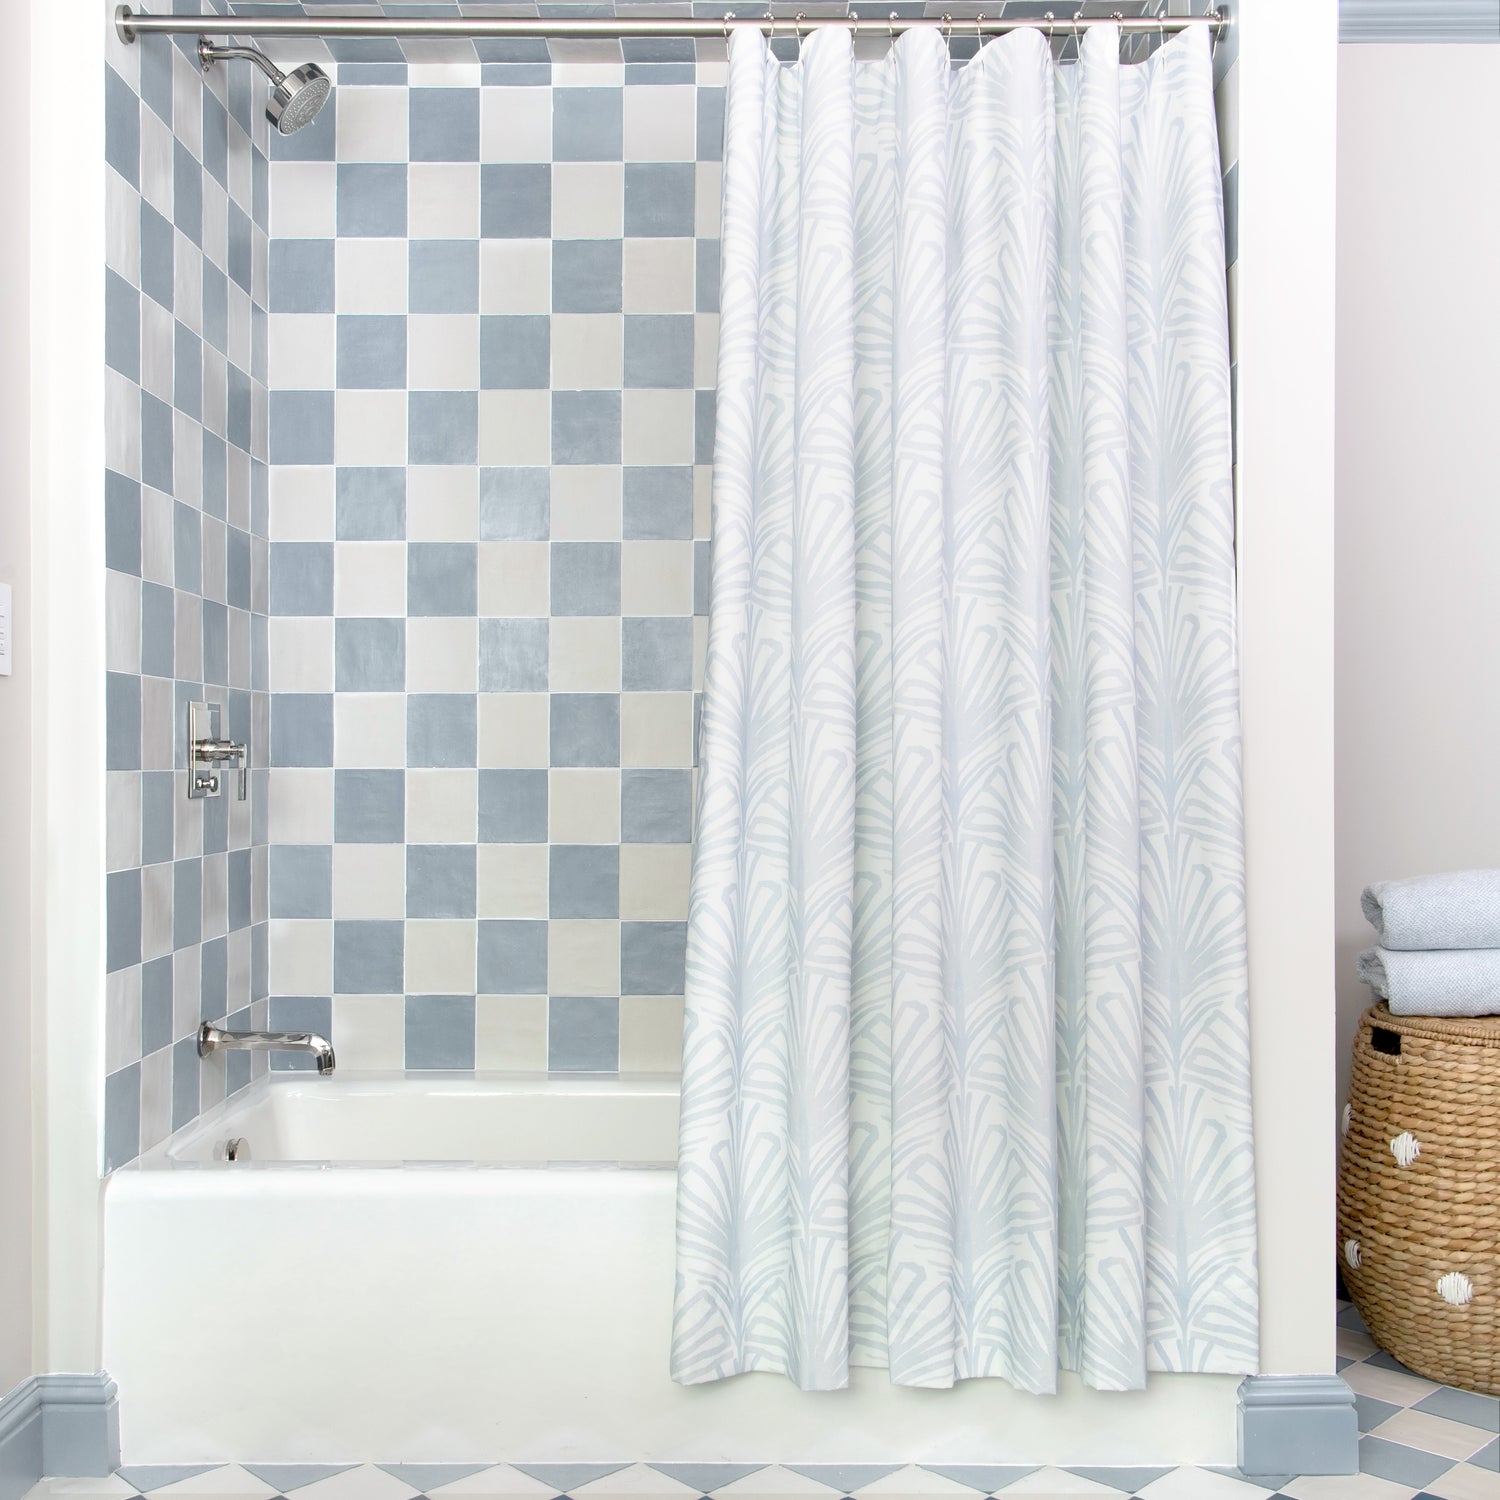 Sky Blue Palm Printed shower curtain hanging on rod in front of white tub in bathroom with blue and white tiles